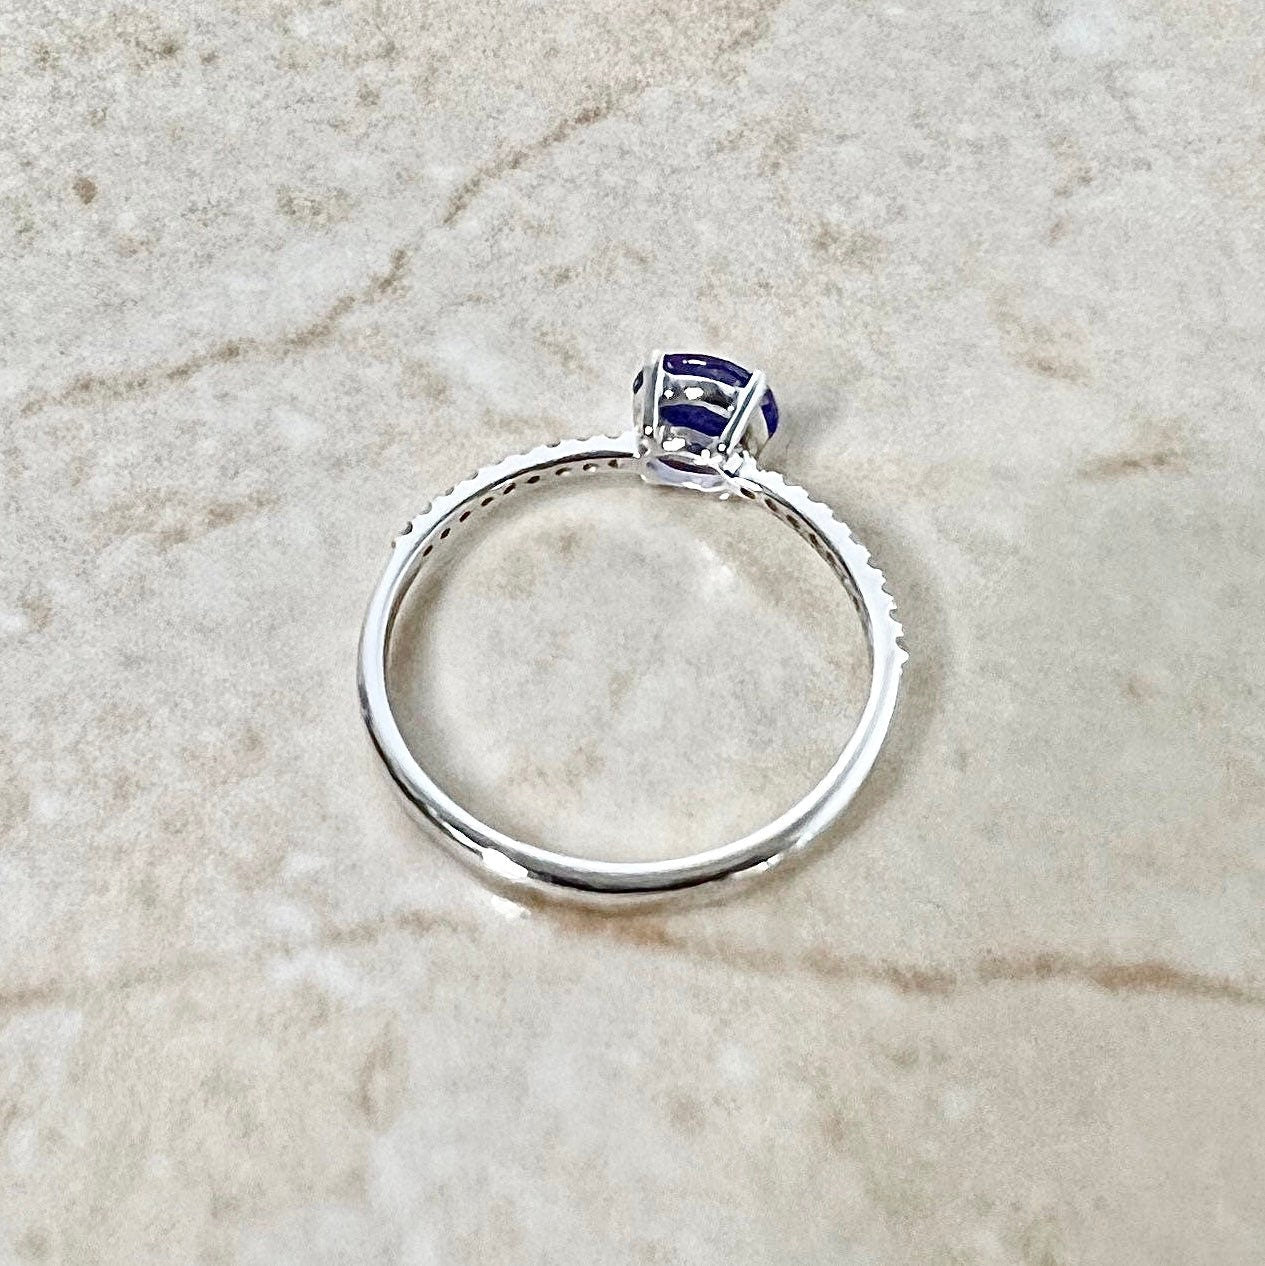 14K Tanzanite & Diamond Solitaire Ring - White Gold Tanzanite Cocktail Ring - April December Birthstone - Birthday Gift - Best Gift For Her